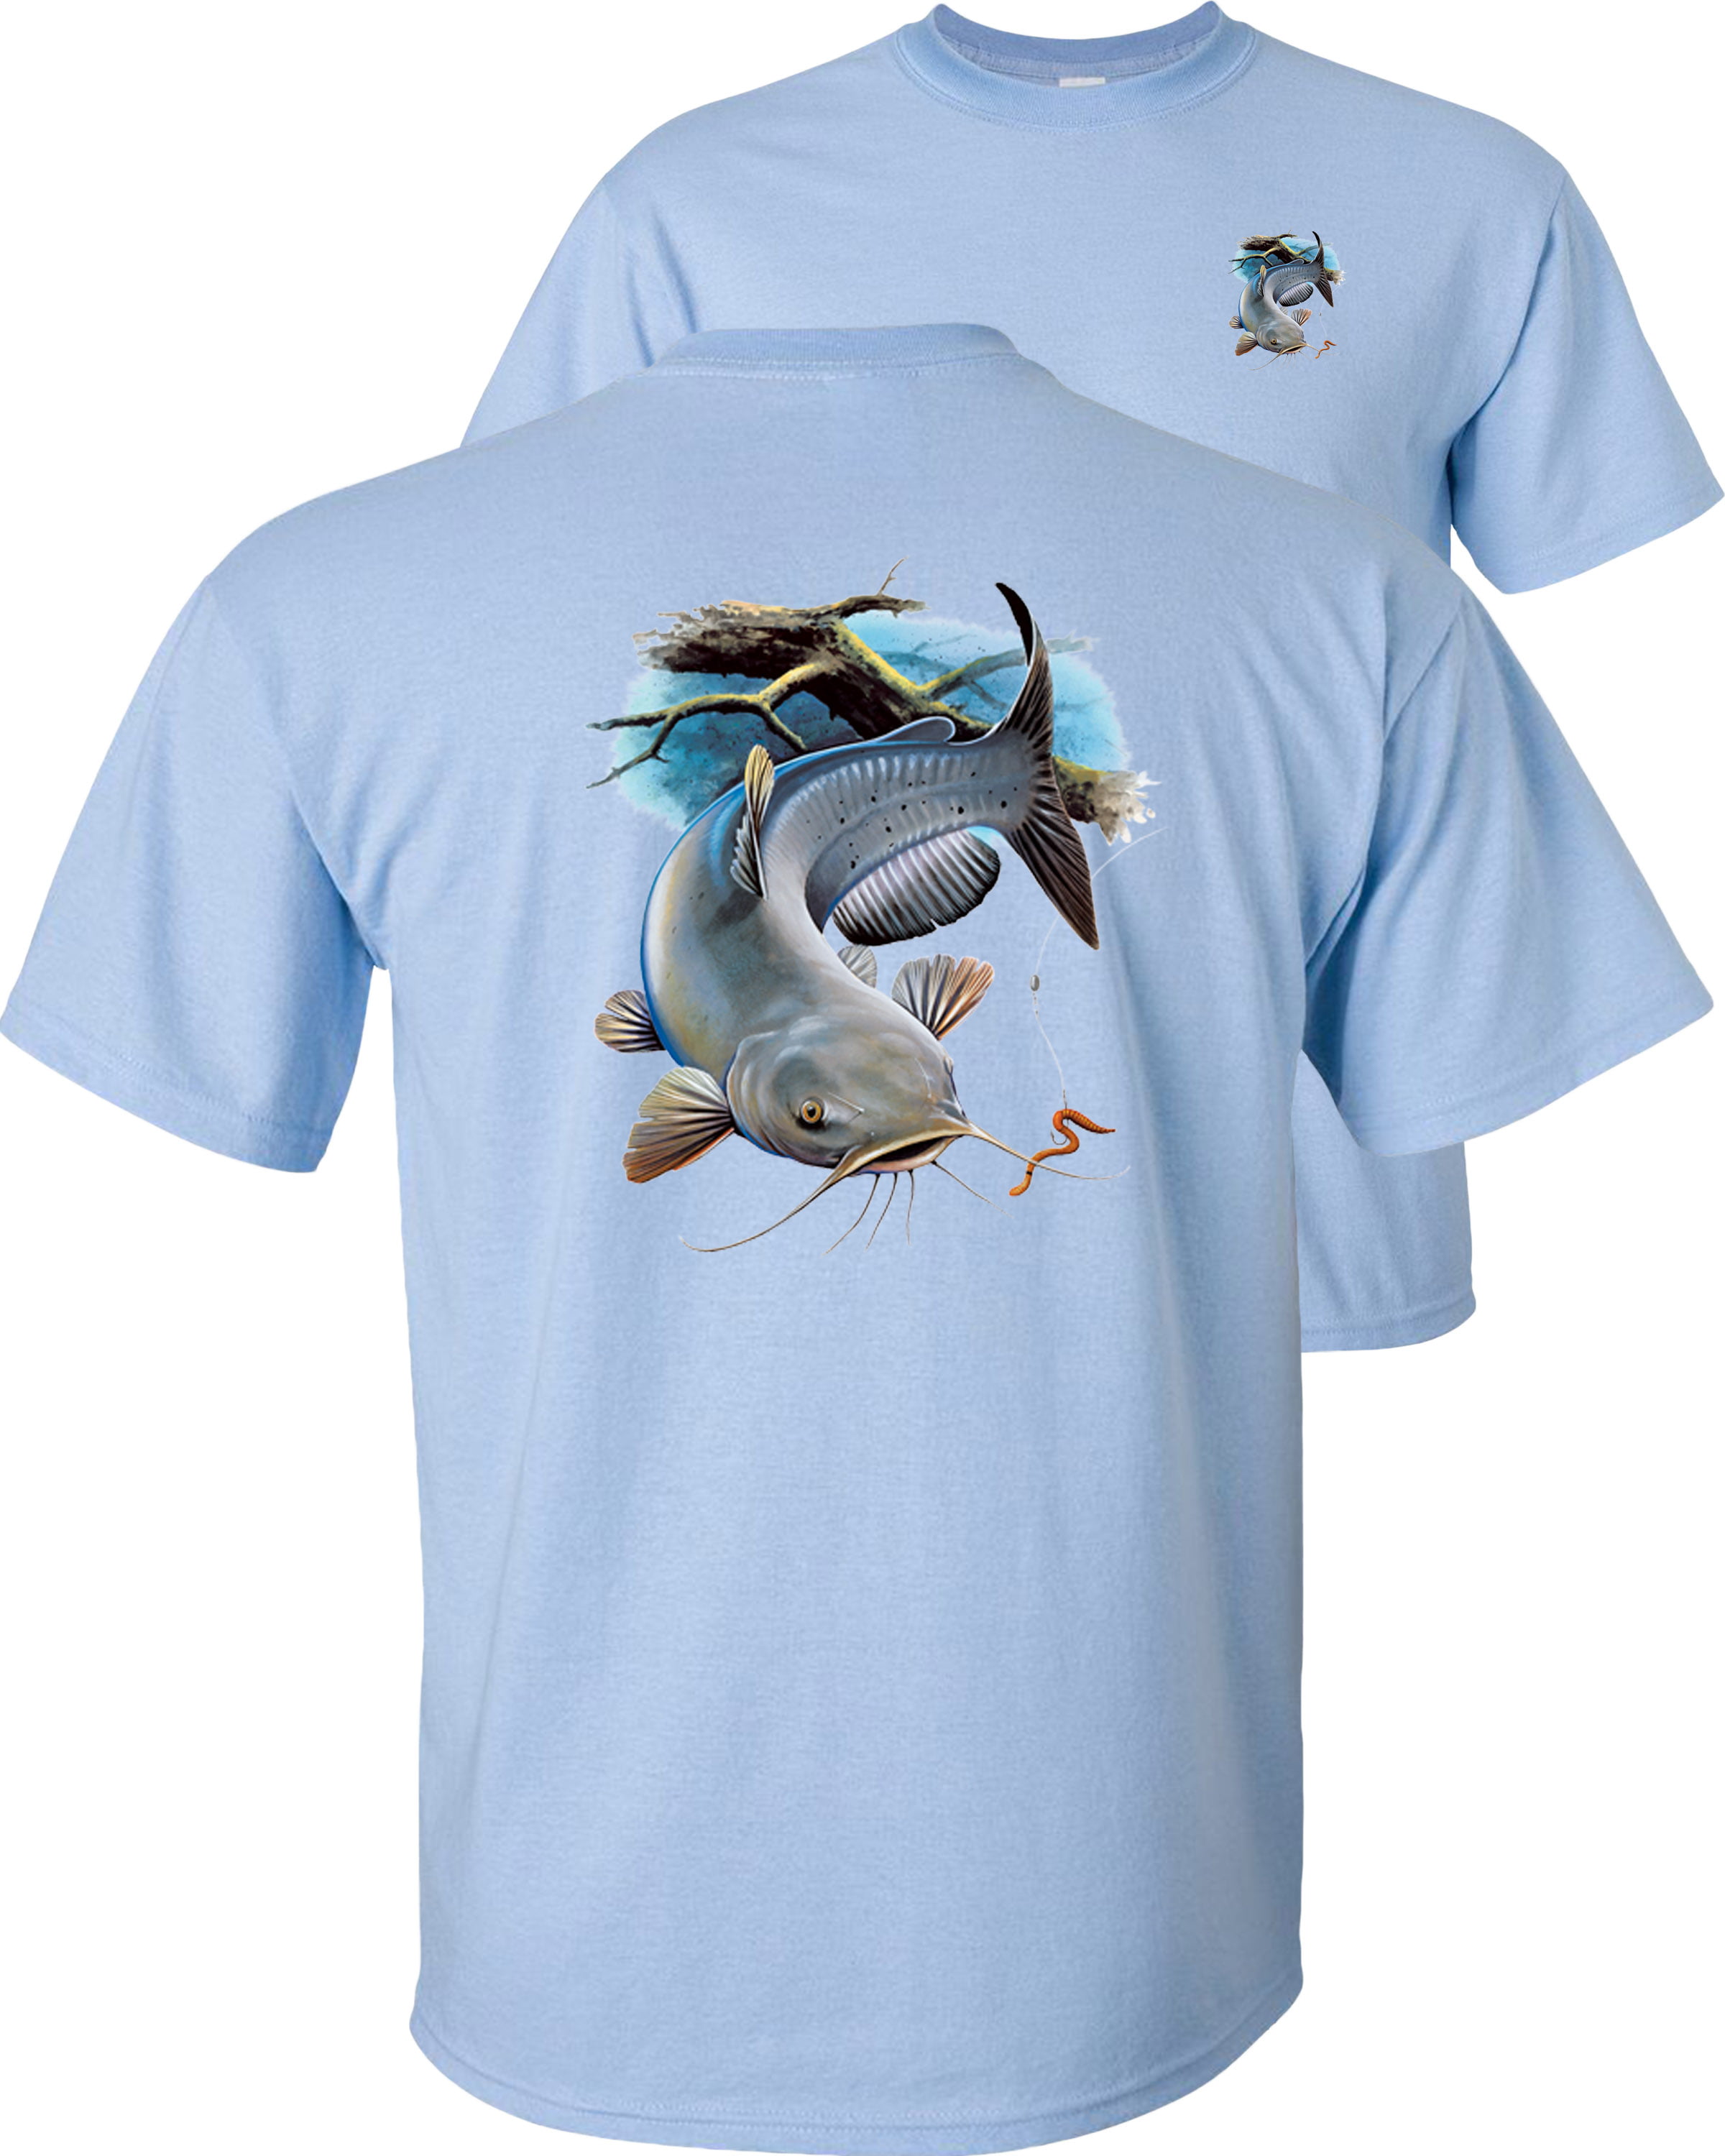 Fair Game Catfish T-Shirt, River Blue Channel, Fishing Graphic Tee-Sand-M 